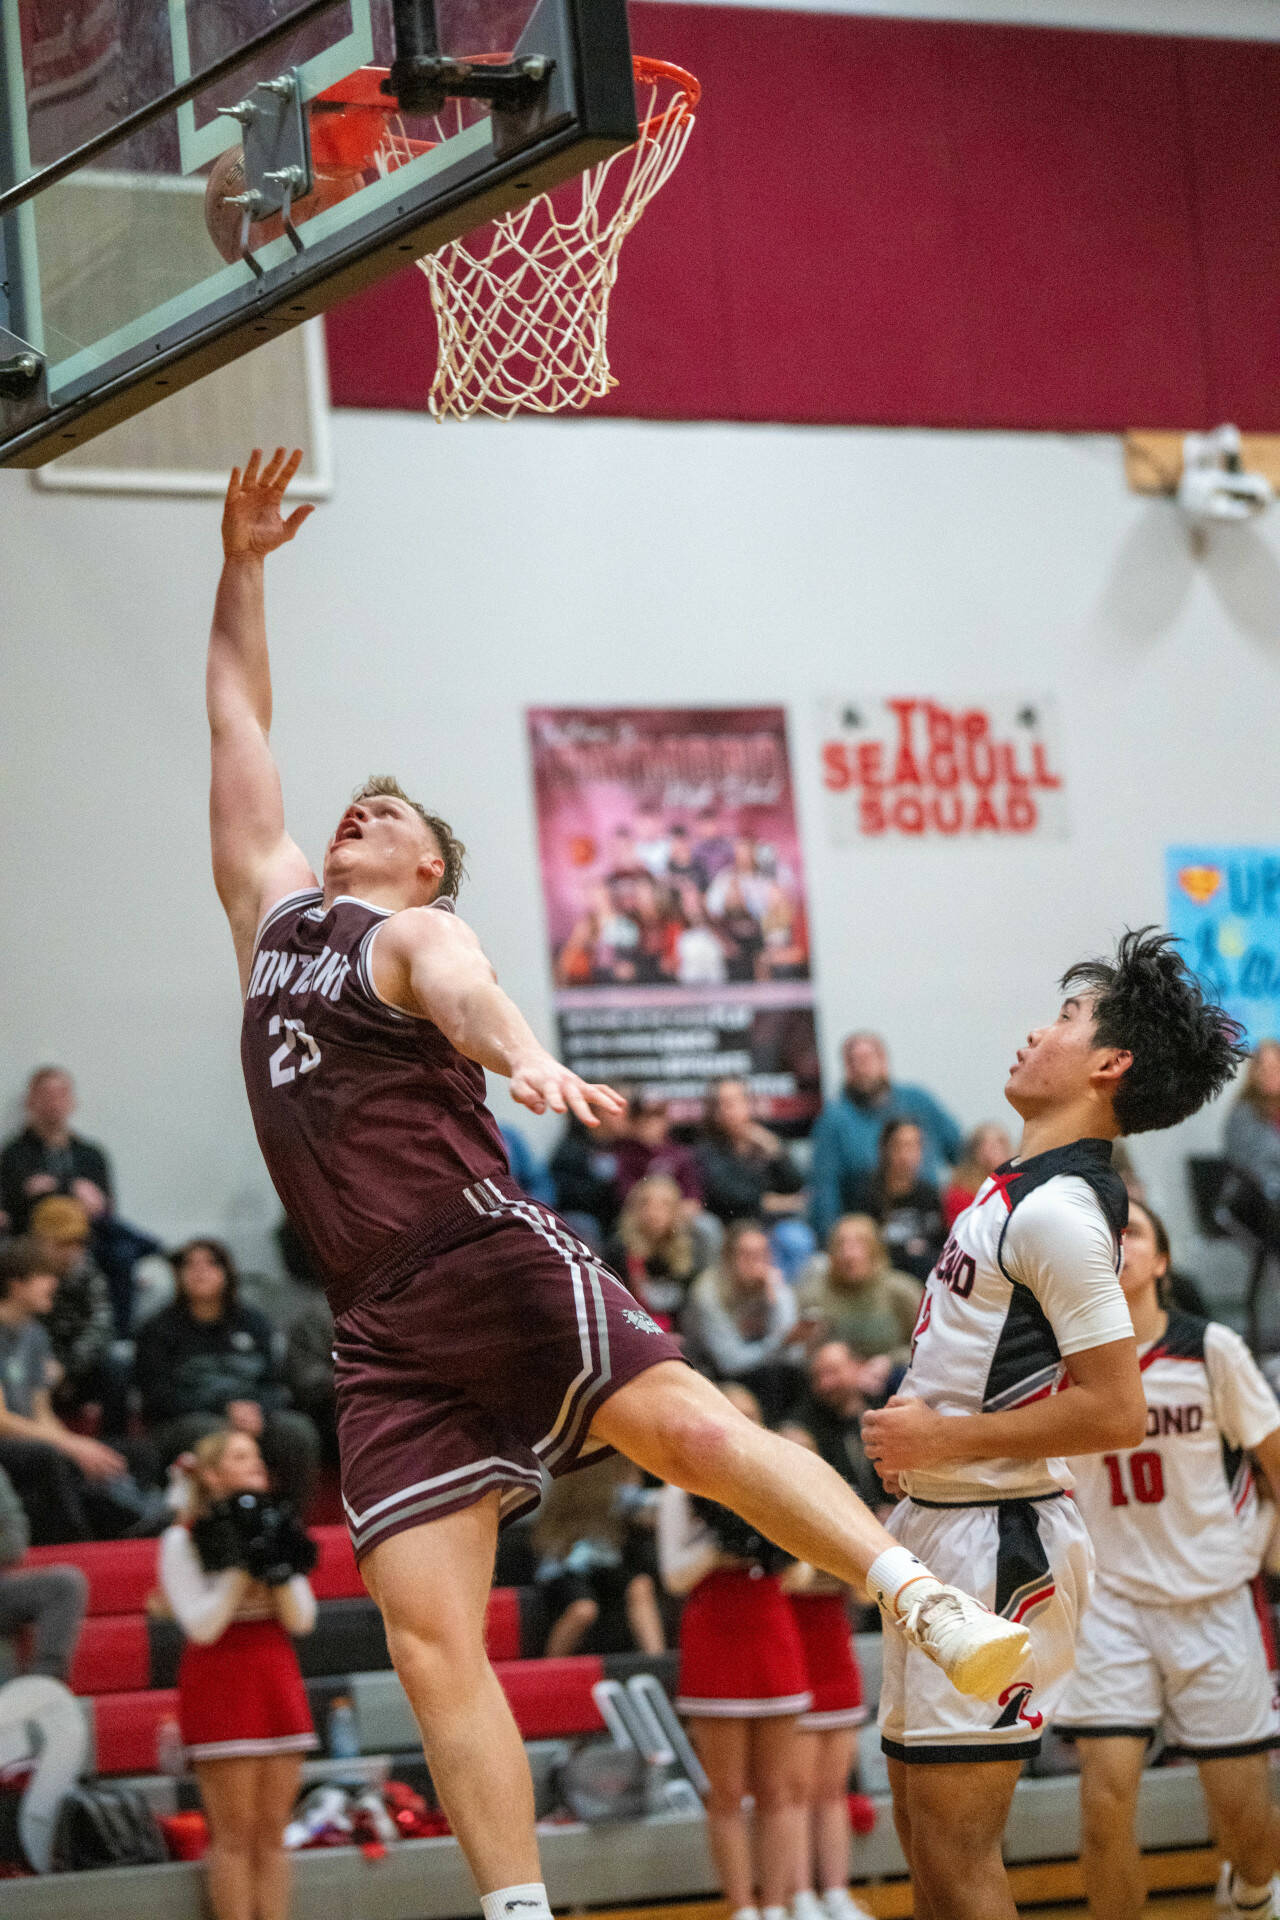 PHOTO BY FOREST WORGUM Montesano senior Tyce Peterson, left, scored in the paint during a 67-47 win over Raymond on Saturday at Raymond High School.